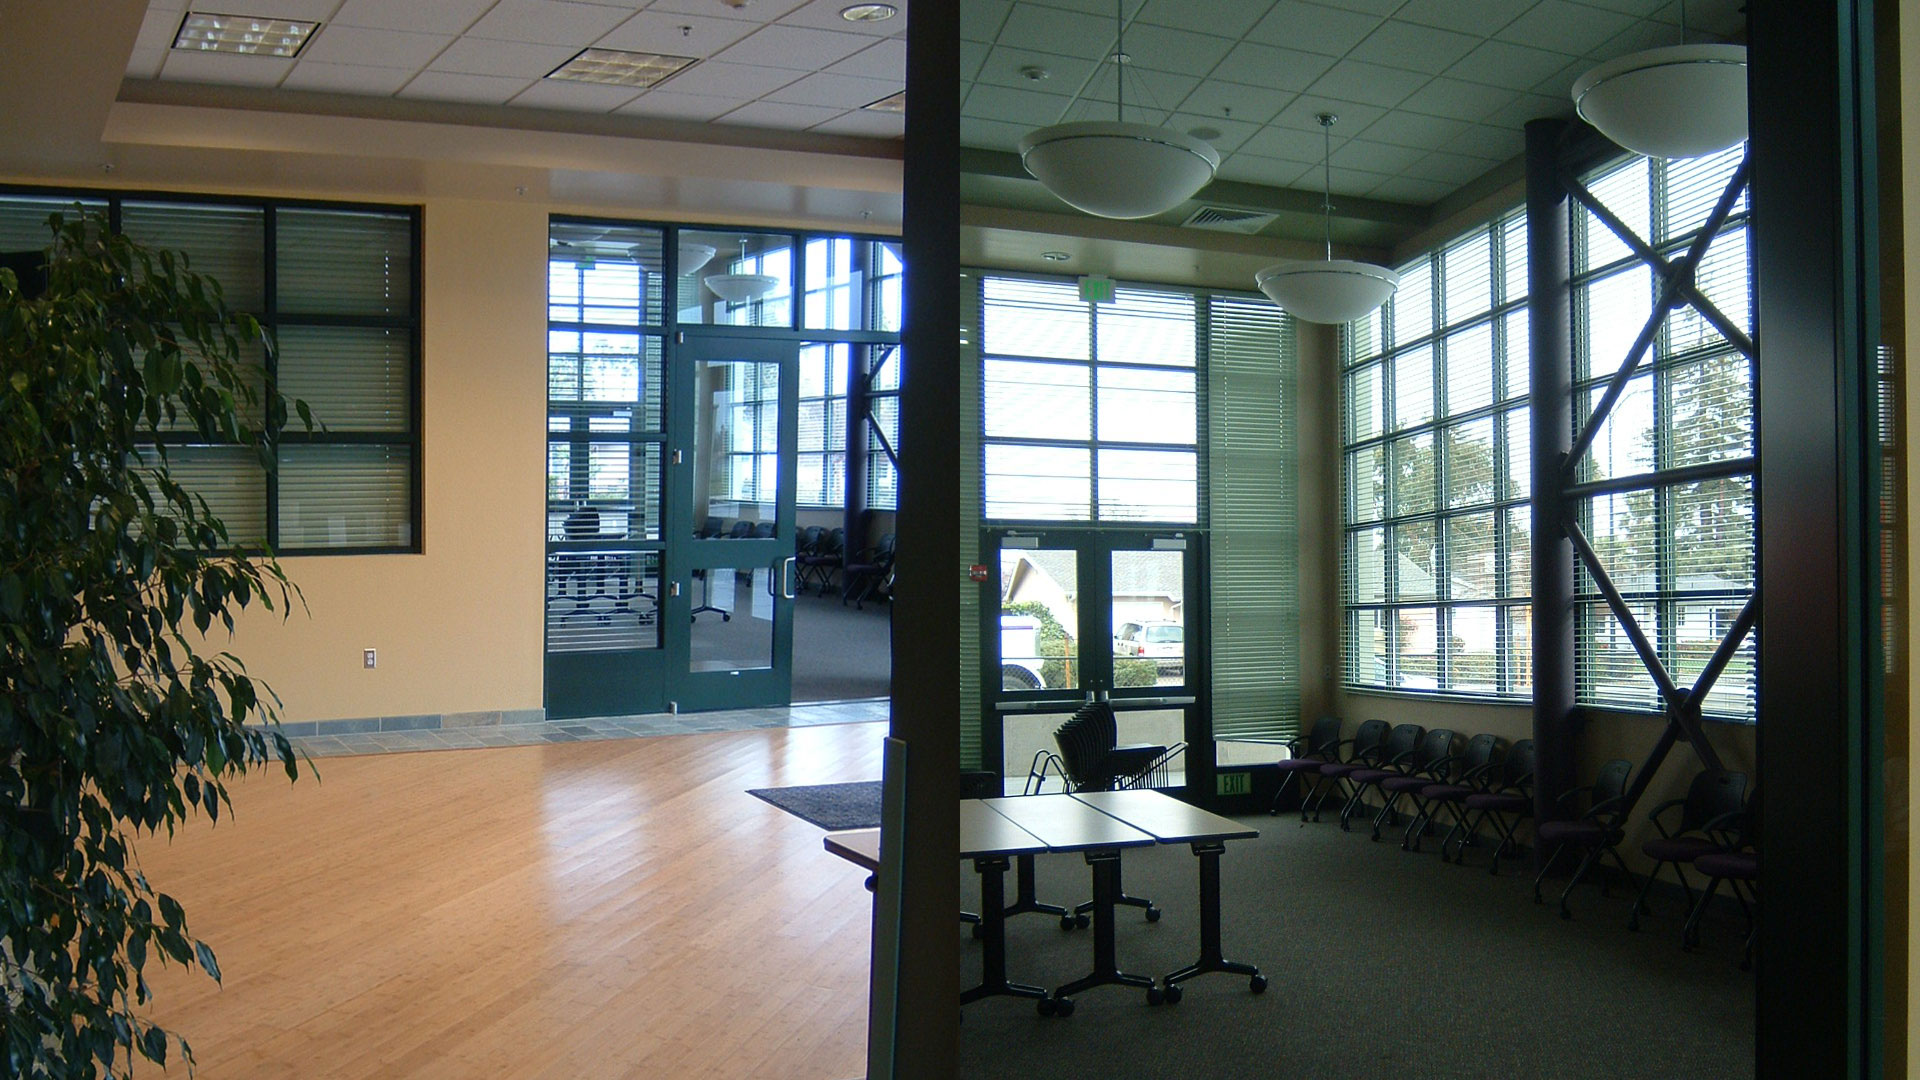 Interior of district office entrance with tall windows and glass double doors.